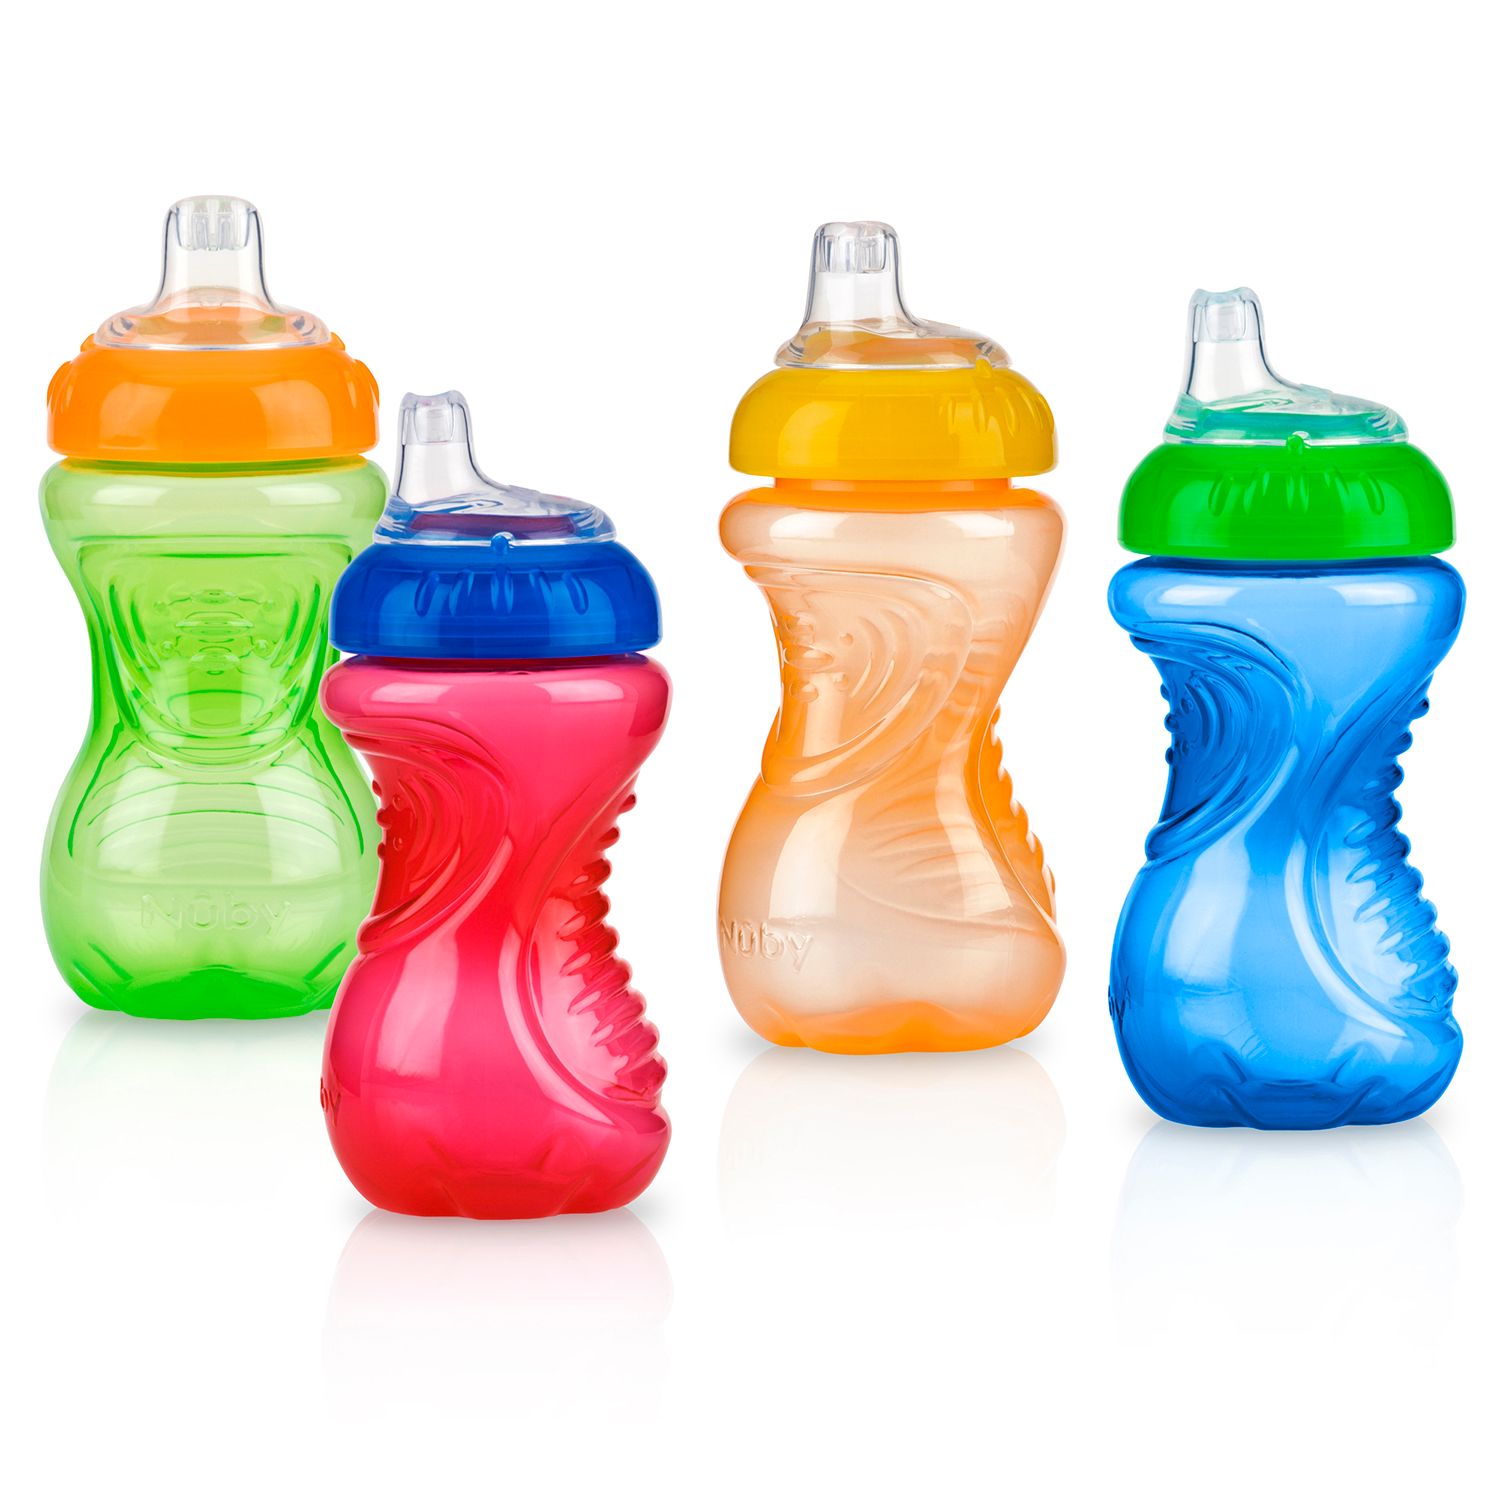 Sippy Cup drawing free image download